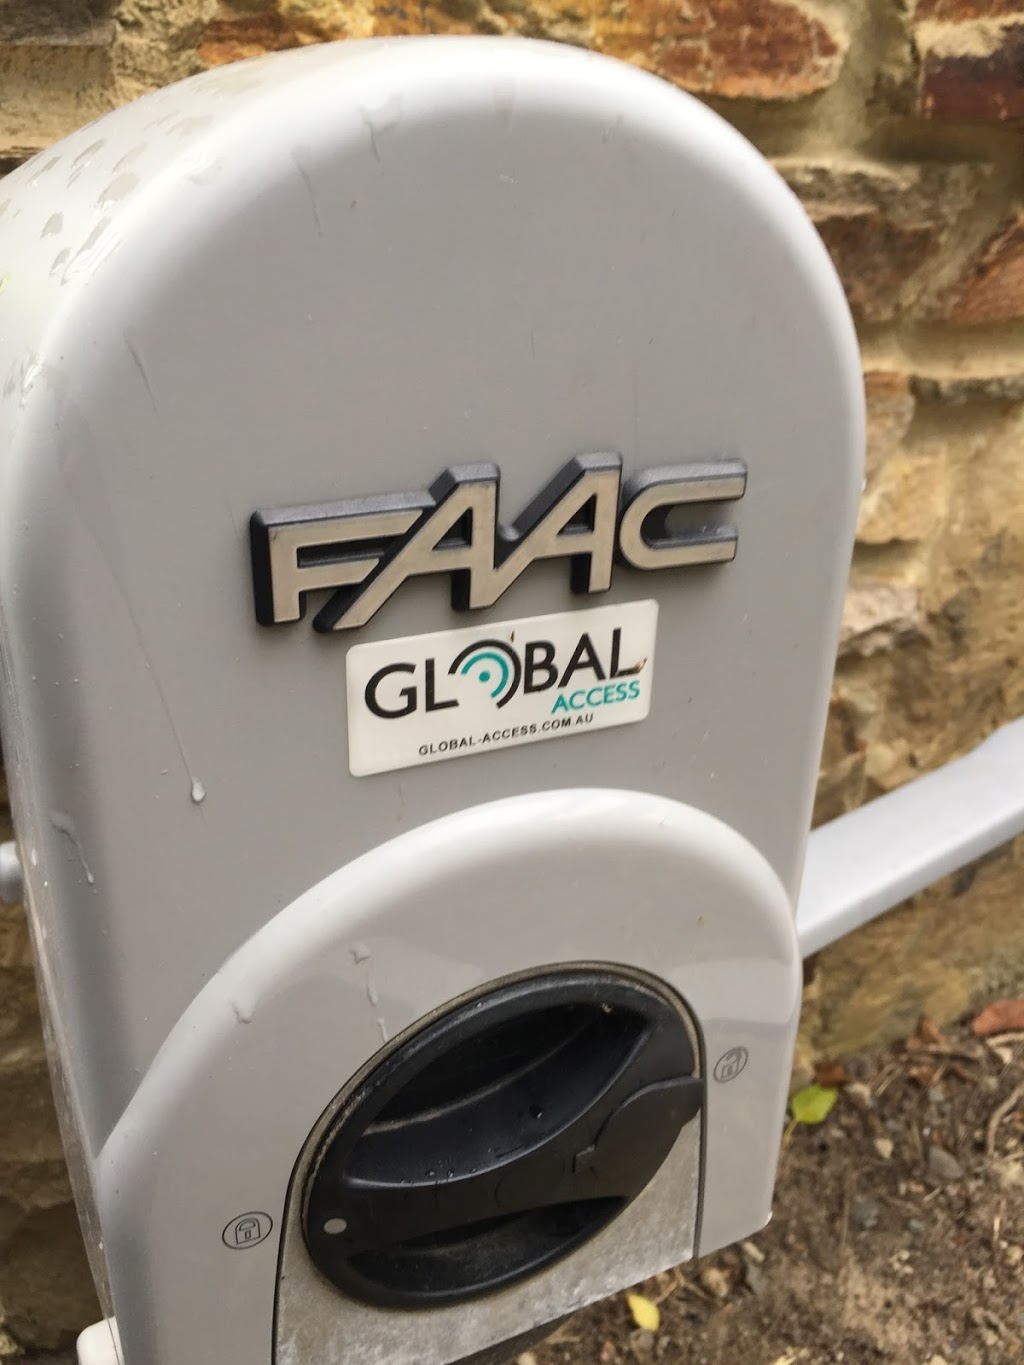 Global Access - Automatic Gate & Door Solutions | hardware store | 34A Access Way, Carrum Downs VIC 3201, Australia | 1300366046 OR +61 1300 366 046